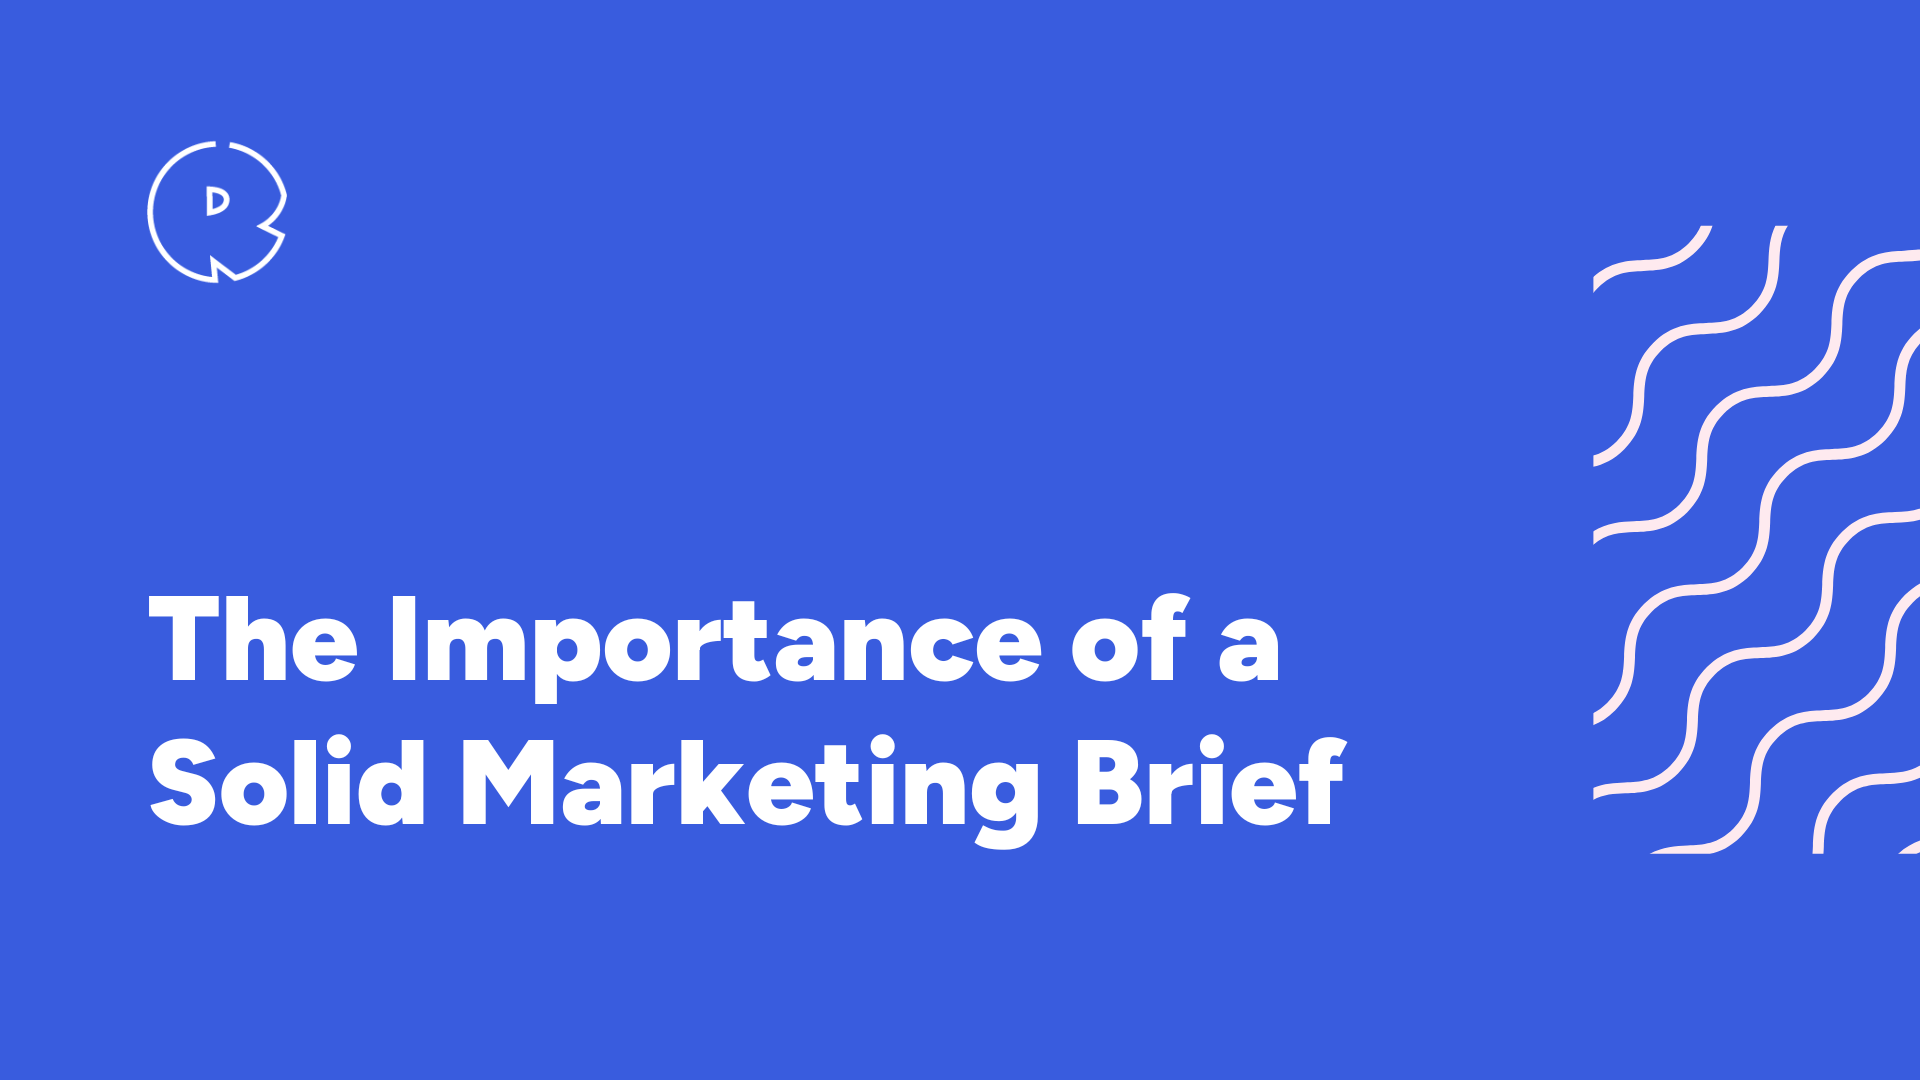 The Importance of a Solid Marketing Brief